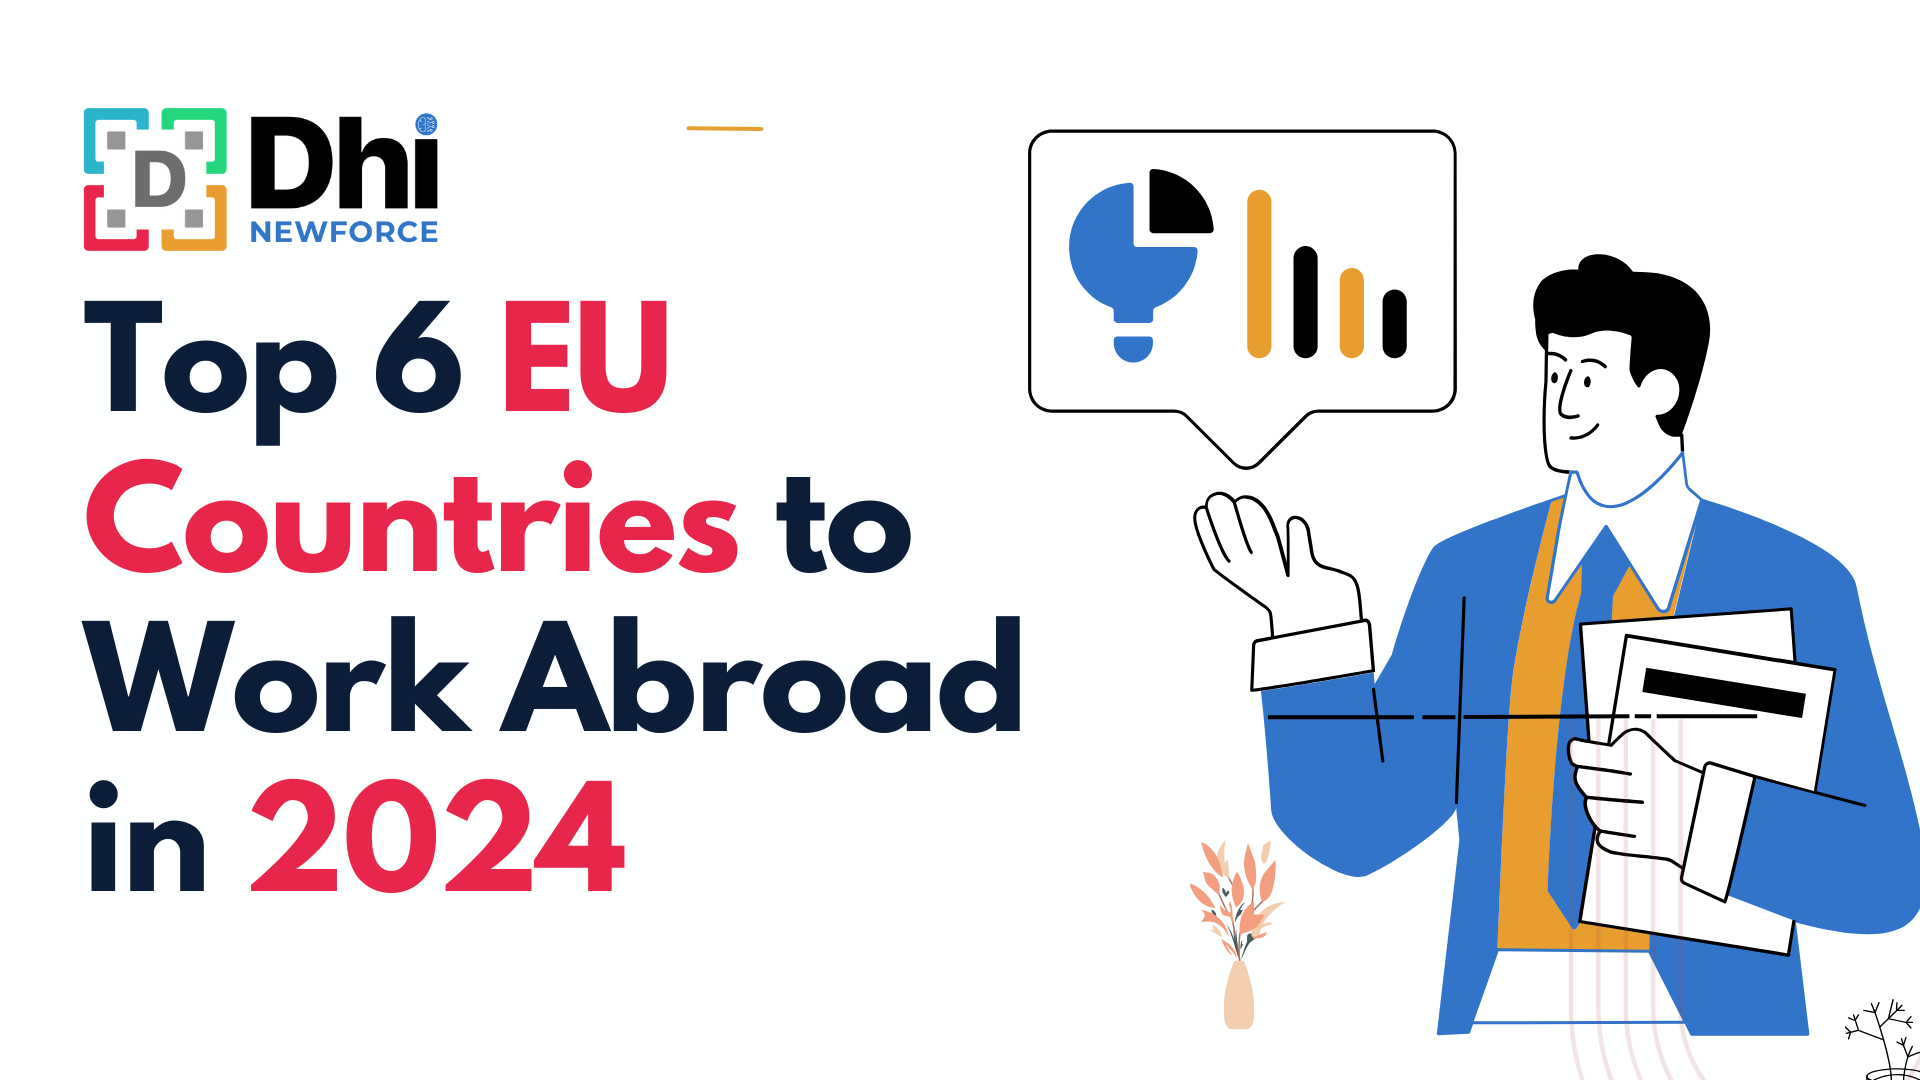 Top 6 EU Countries to Work Abroad in 2024